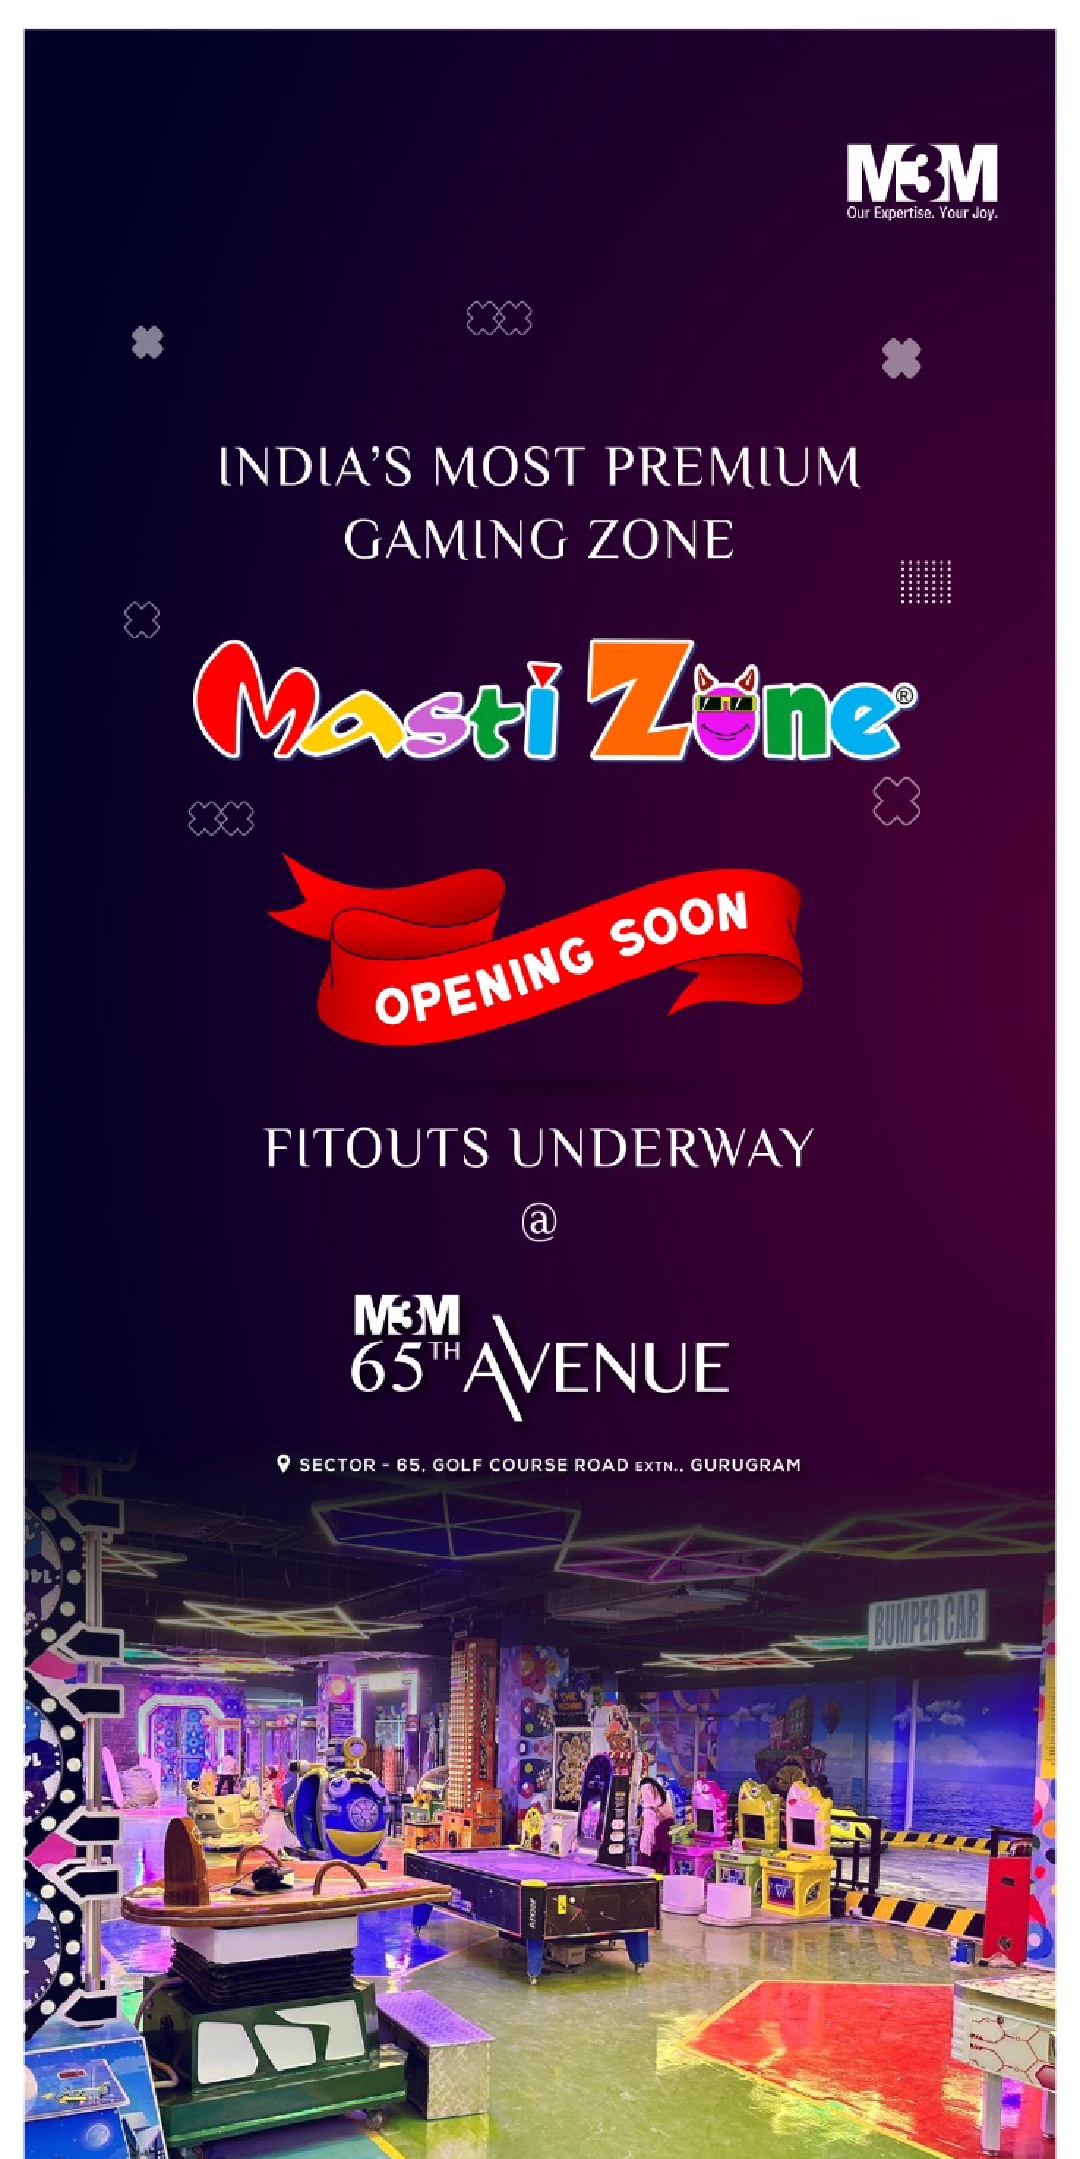 India's Most premium gaming zone opening soon at M3M 65th Avenue, Gurgaon